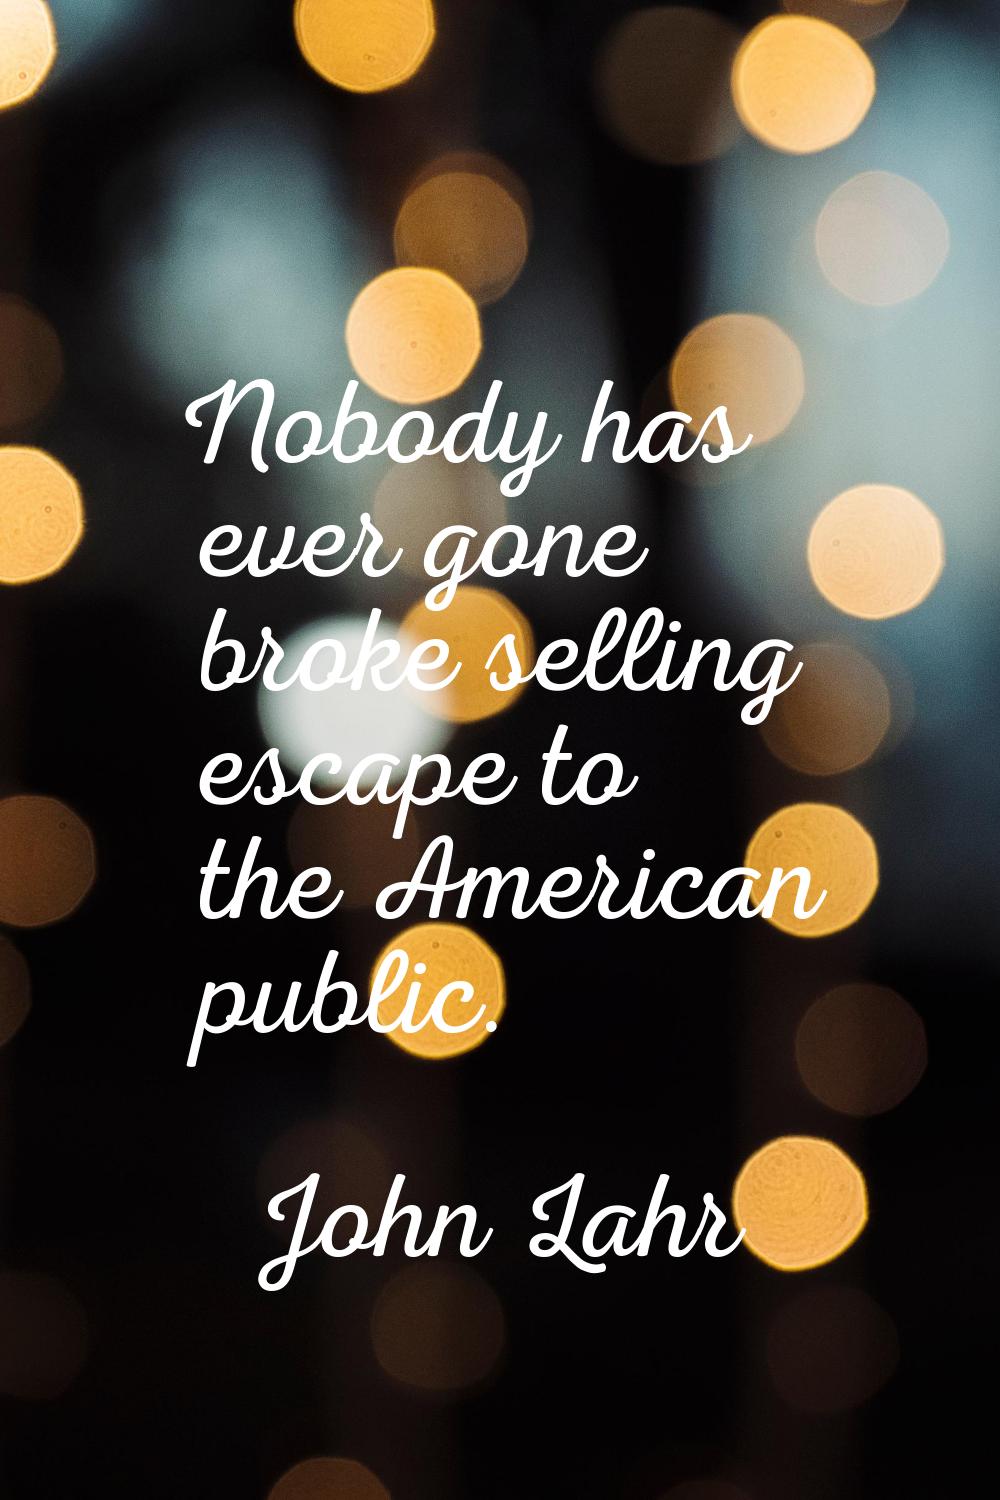 Nobody has ever gone broke selling escape to the American public.